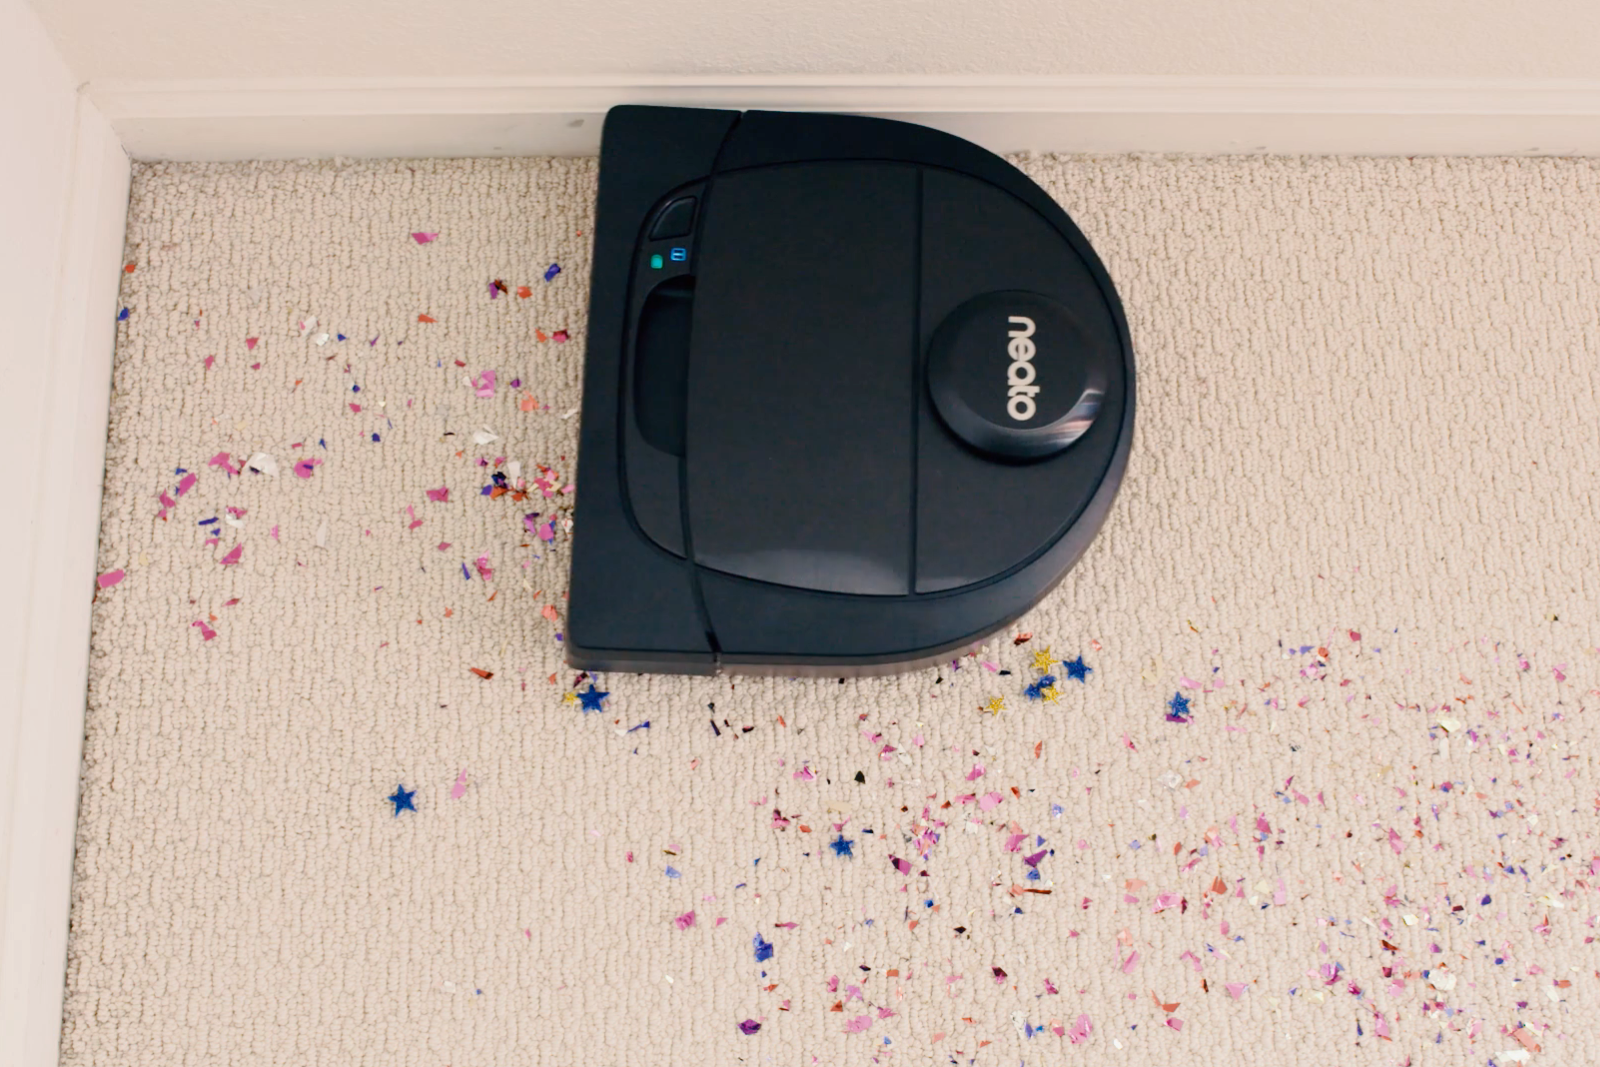 Neato launches Botvac D6 and D4 to make robot cleaning more affordable image 1